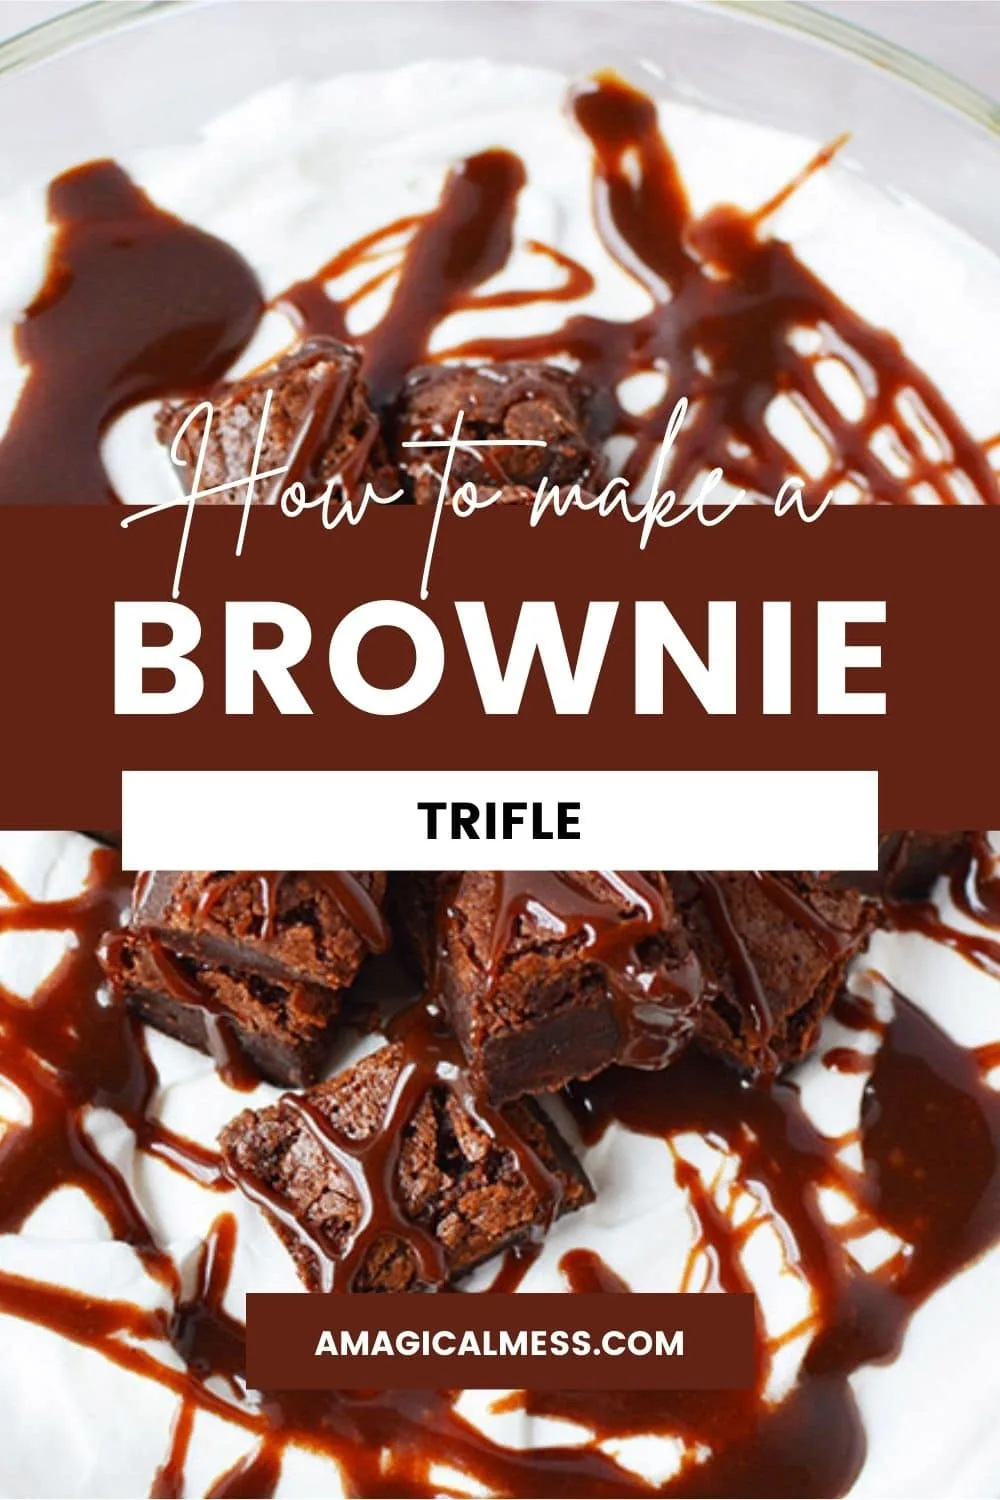 Brownies drizzled with hot fudge on top of a brownie trifle.